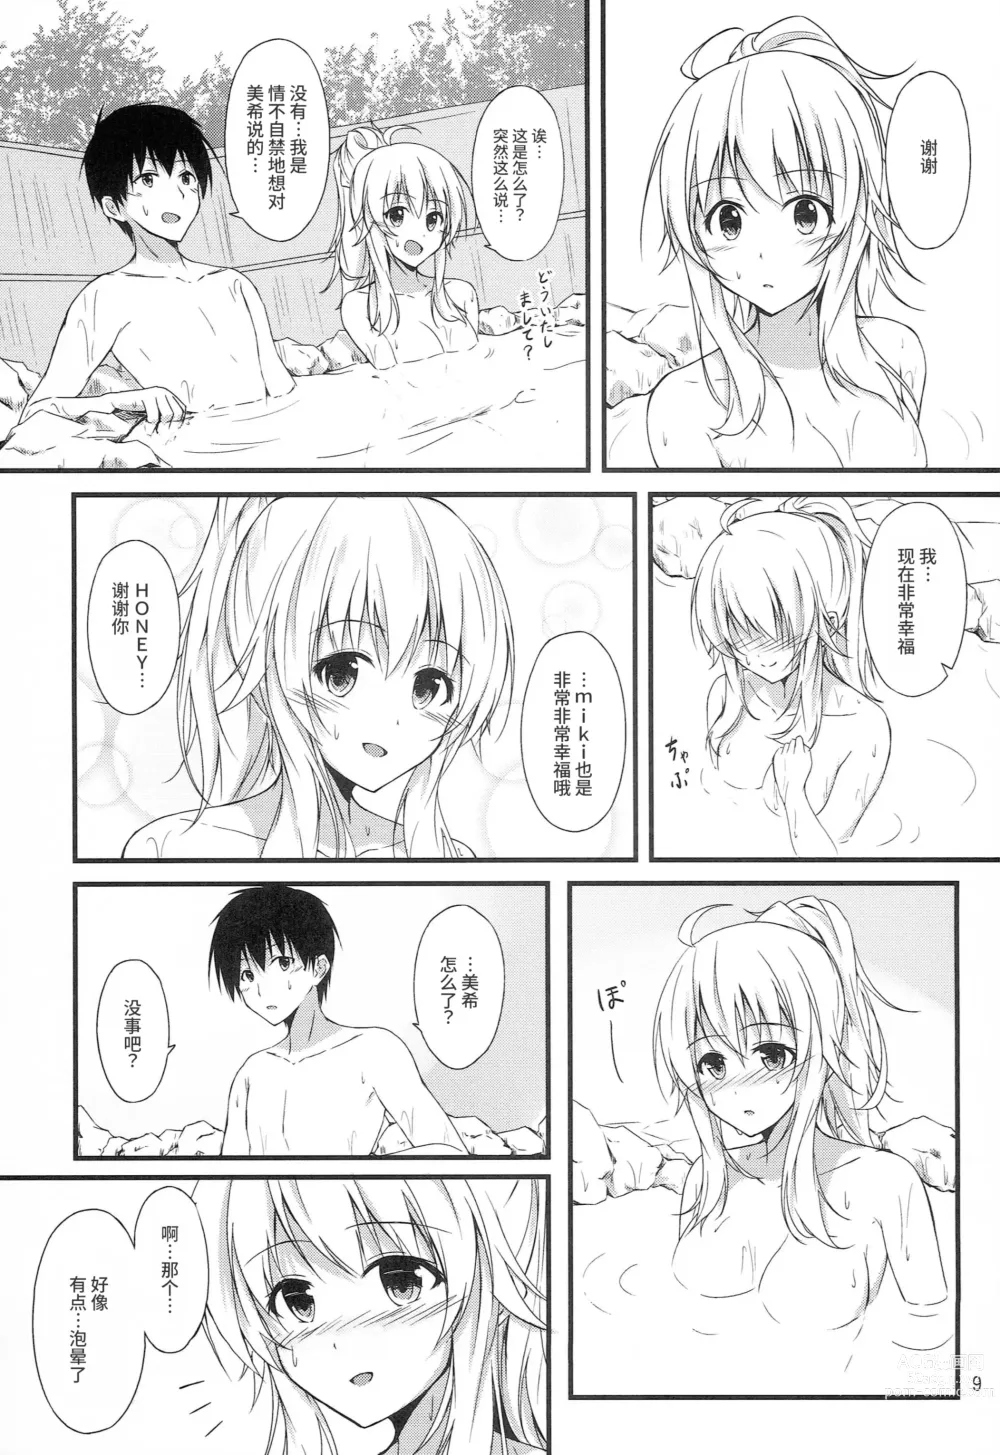 Page 7 of doujinshi Miki to Honey no DeepLove